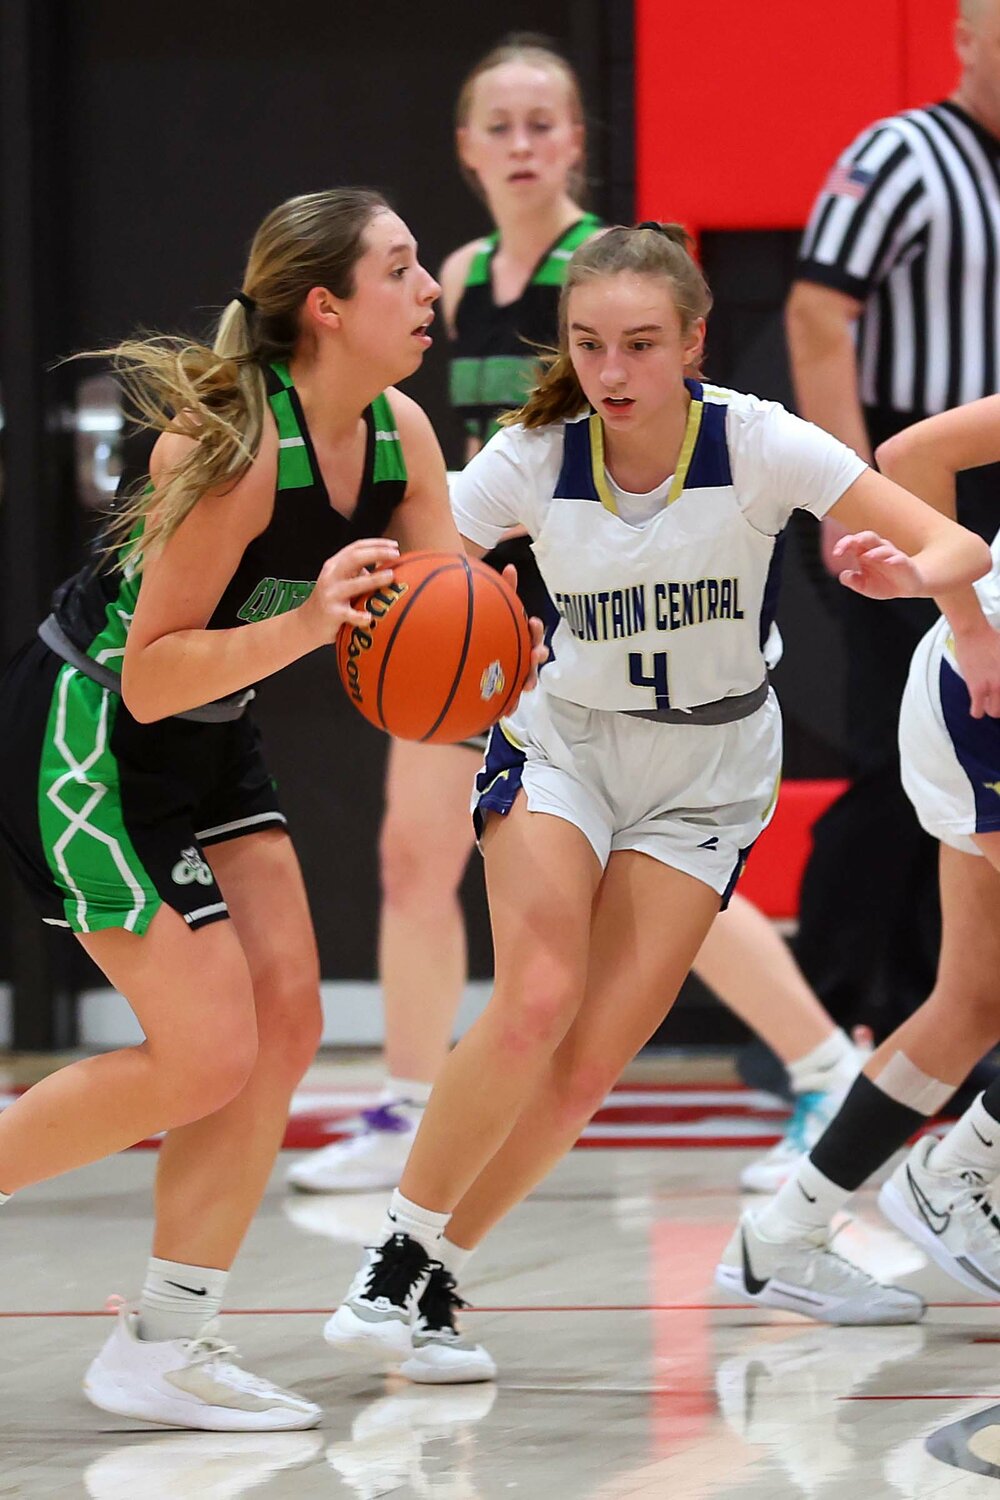 Rylee Simko of Fountain Central - guarding Riley Dellinger of Clinton Central